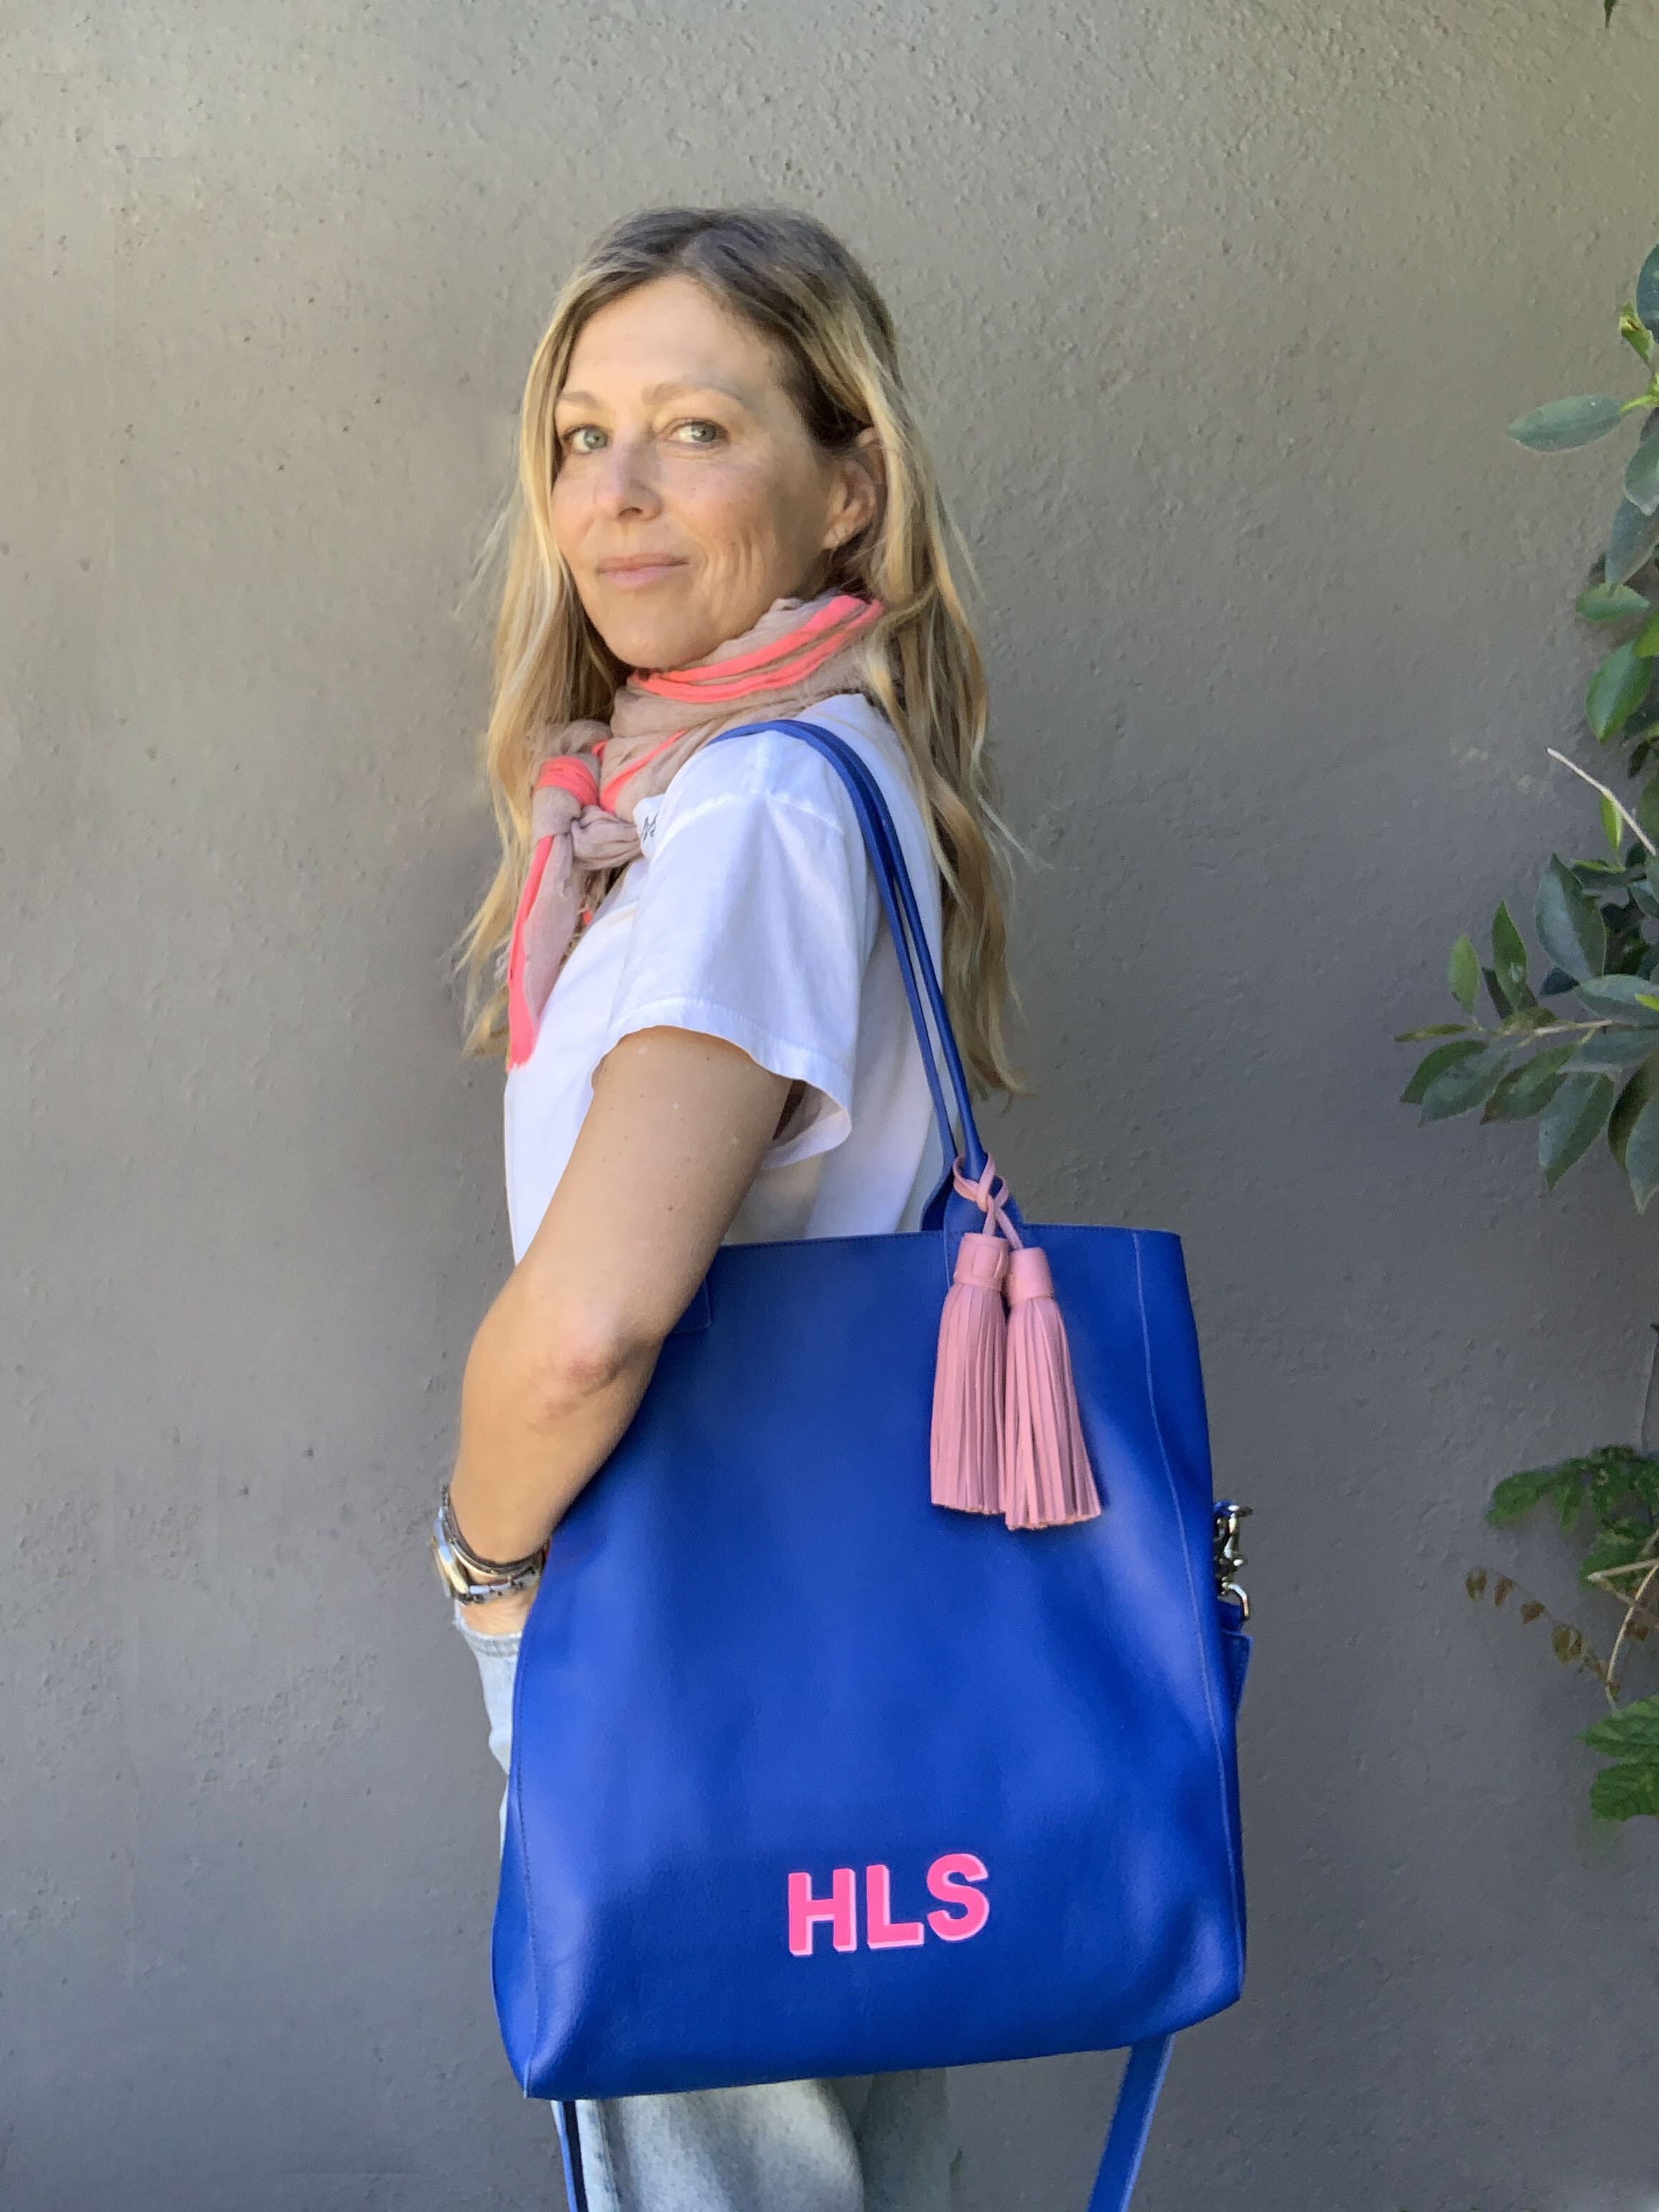 The Foldover Transport Tote